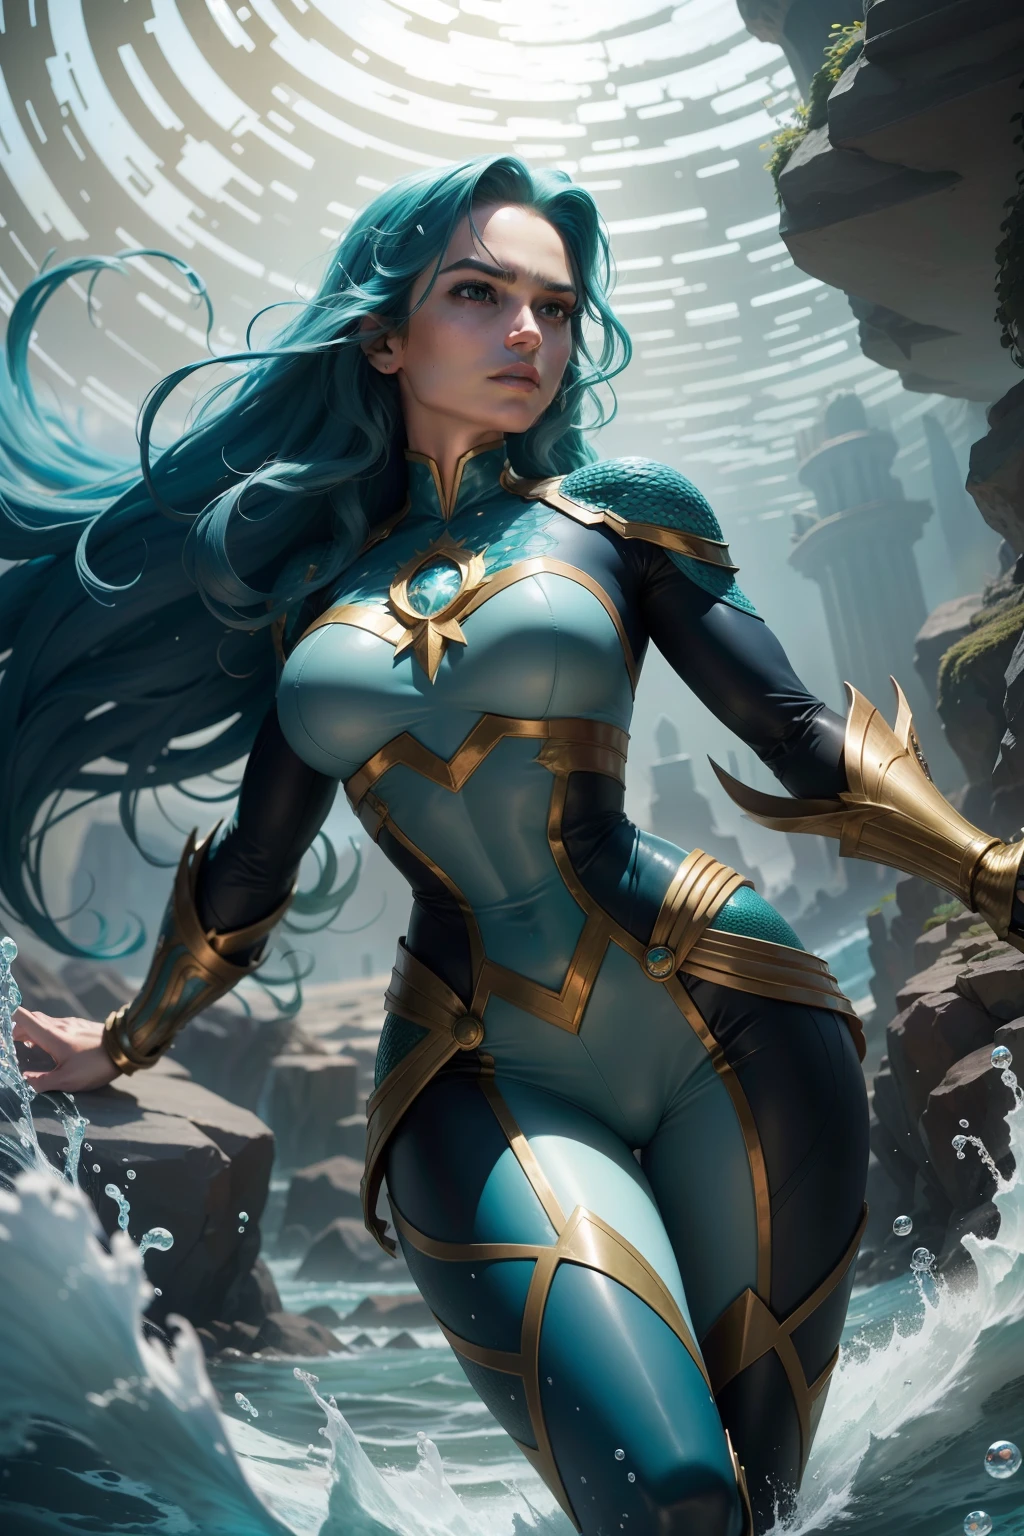 Mera is a DC Comics character known as the Queen of Xebel and wife of Aquaman. She is an Atlantean with the ability to manipulate water, allowing her to create aquatic constructs and control sea currents. Her personality is marked by her determination and loyalty to Aquaman and his people. Mera is often involved in events in DC's aquatic universe, fighting alongside her husband to protect Atlantis and the seas. Her story spans from seeking justice to ruling Xebel, bringing depth to DC's undersea mythology.